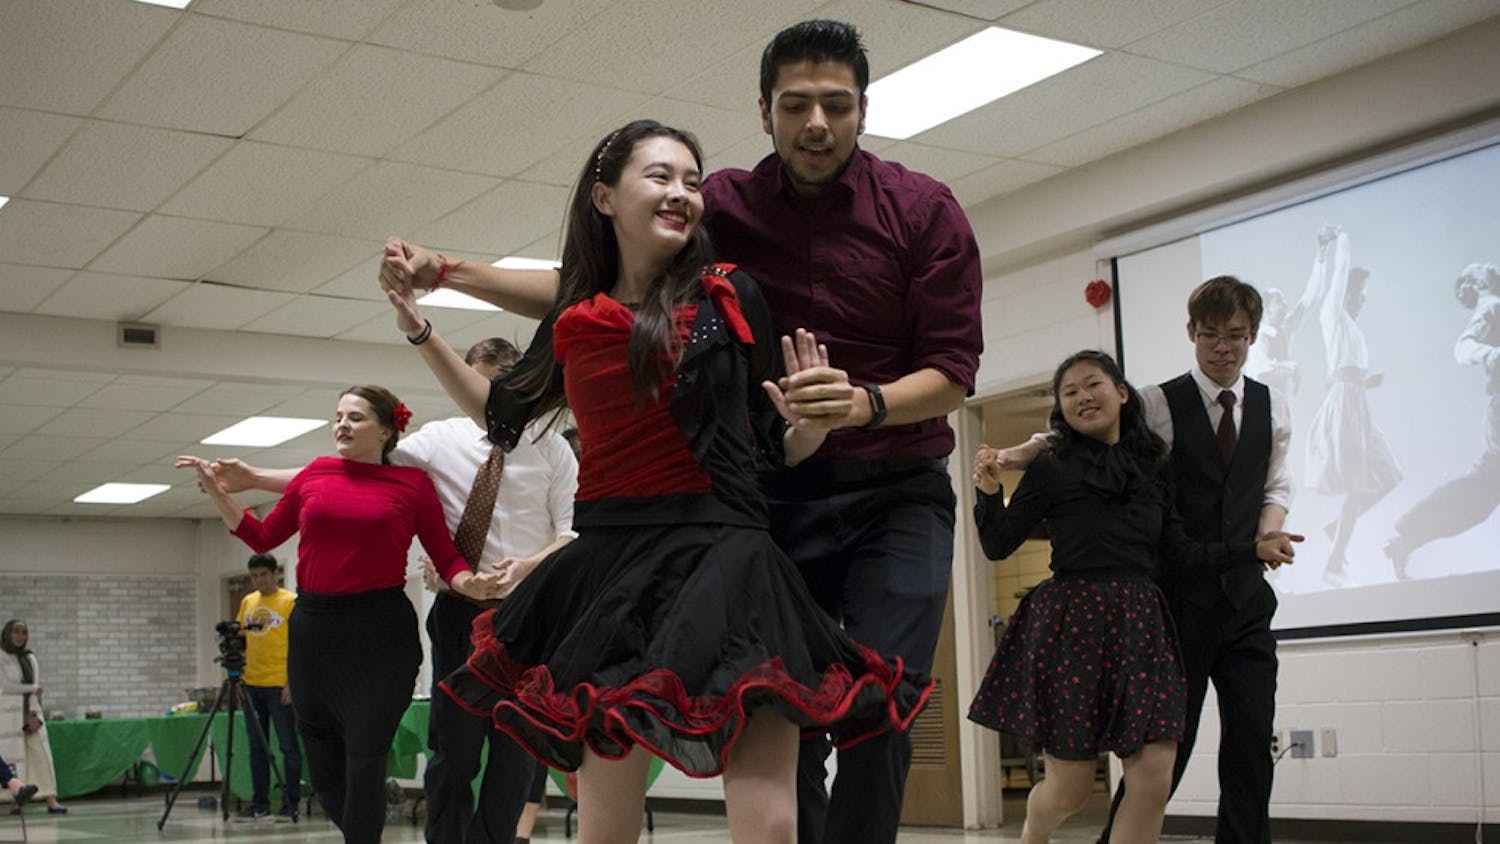 Liberty Forster and Avinash Divecha perform with the IU Swing Dance Club at the International Dance Night to welcome Venezuelan refugees. The Swing Dance Club was the first performance of the evening.